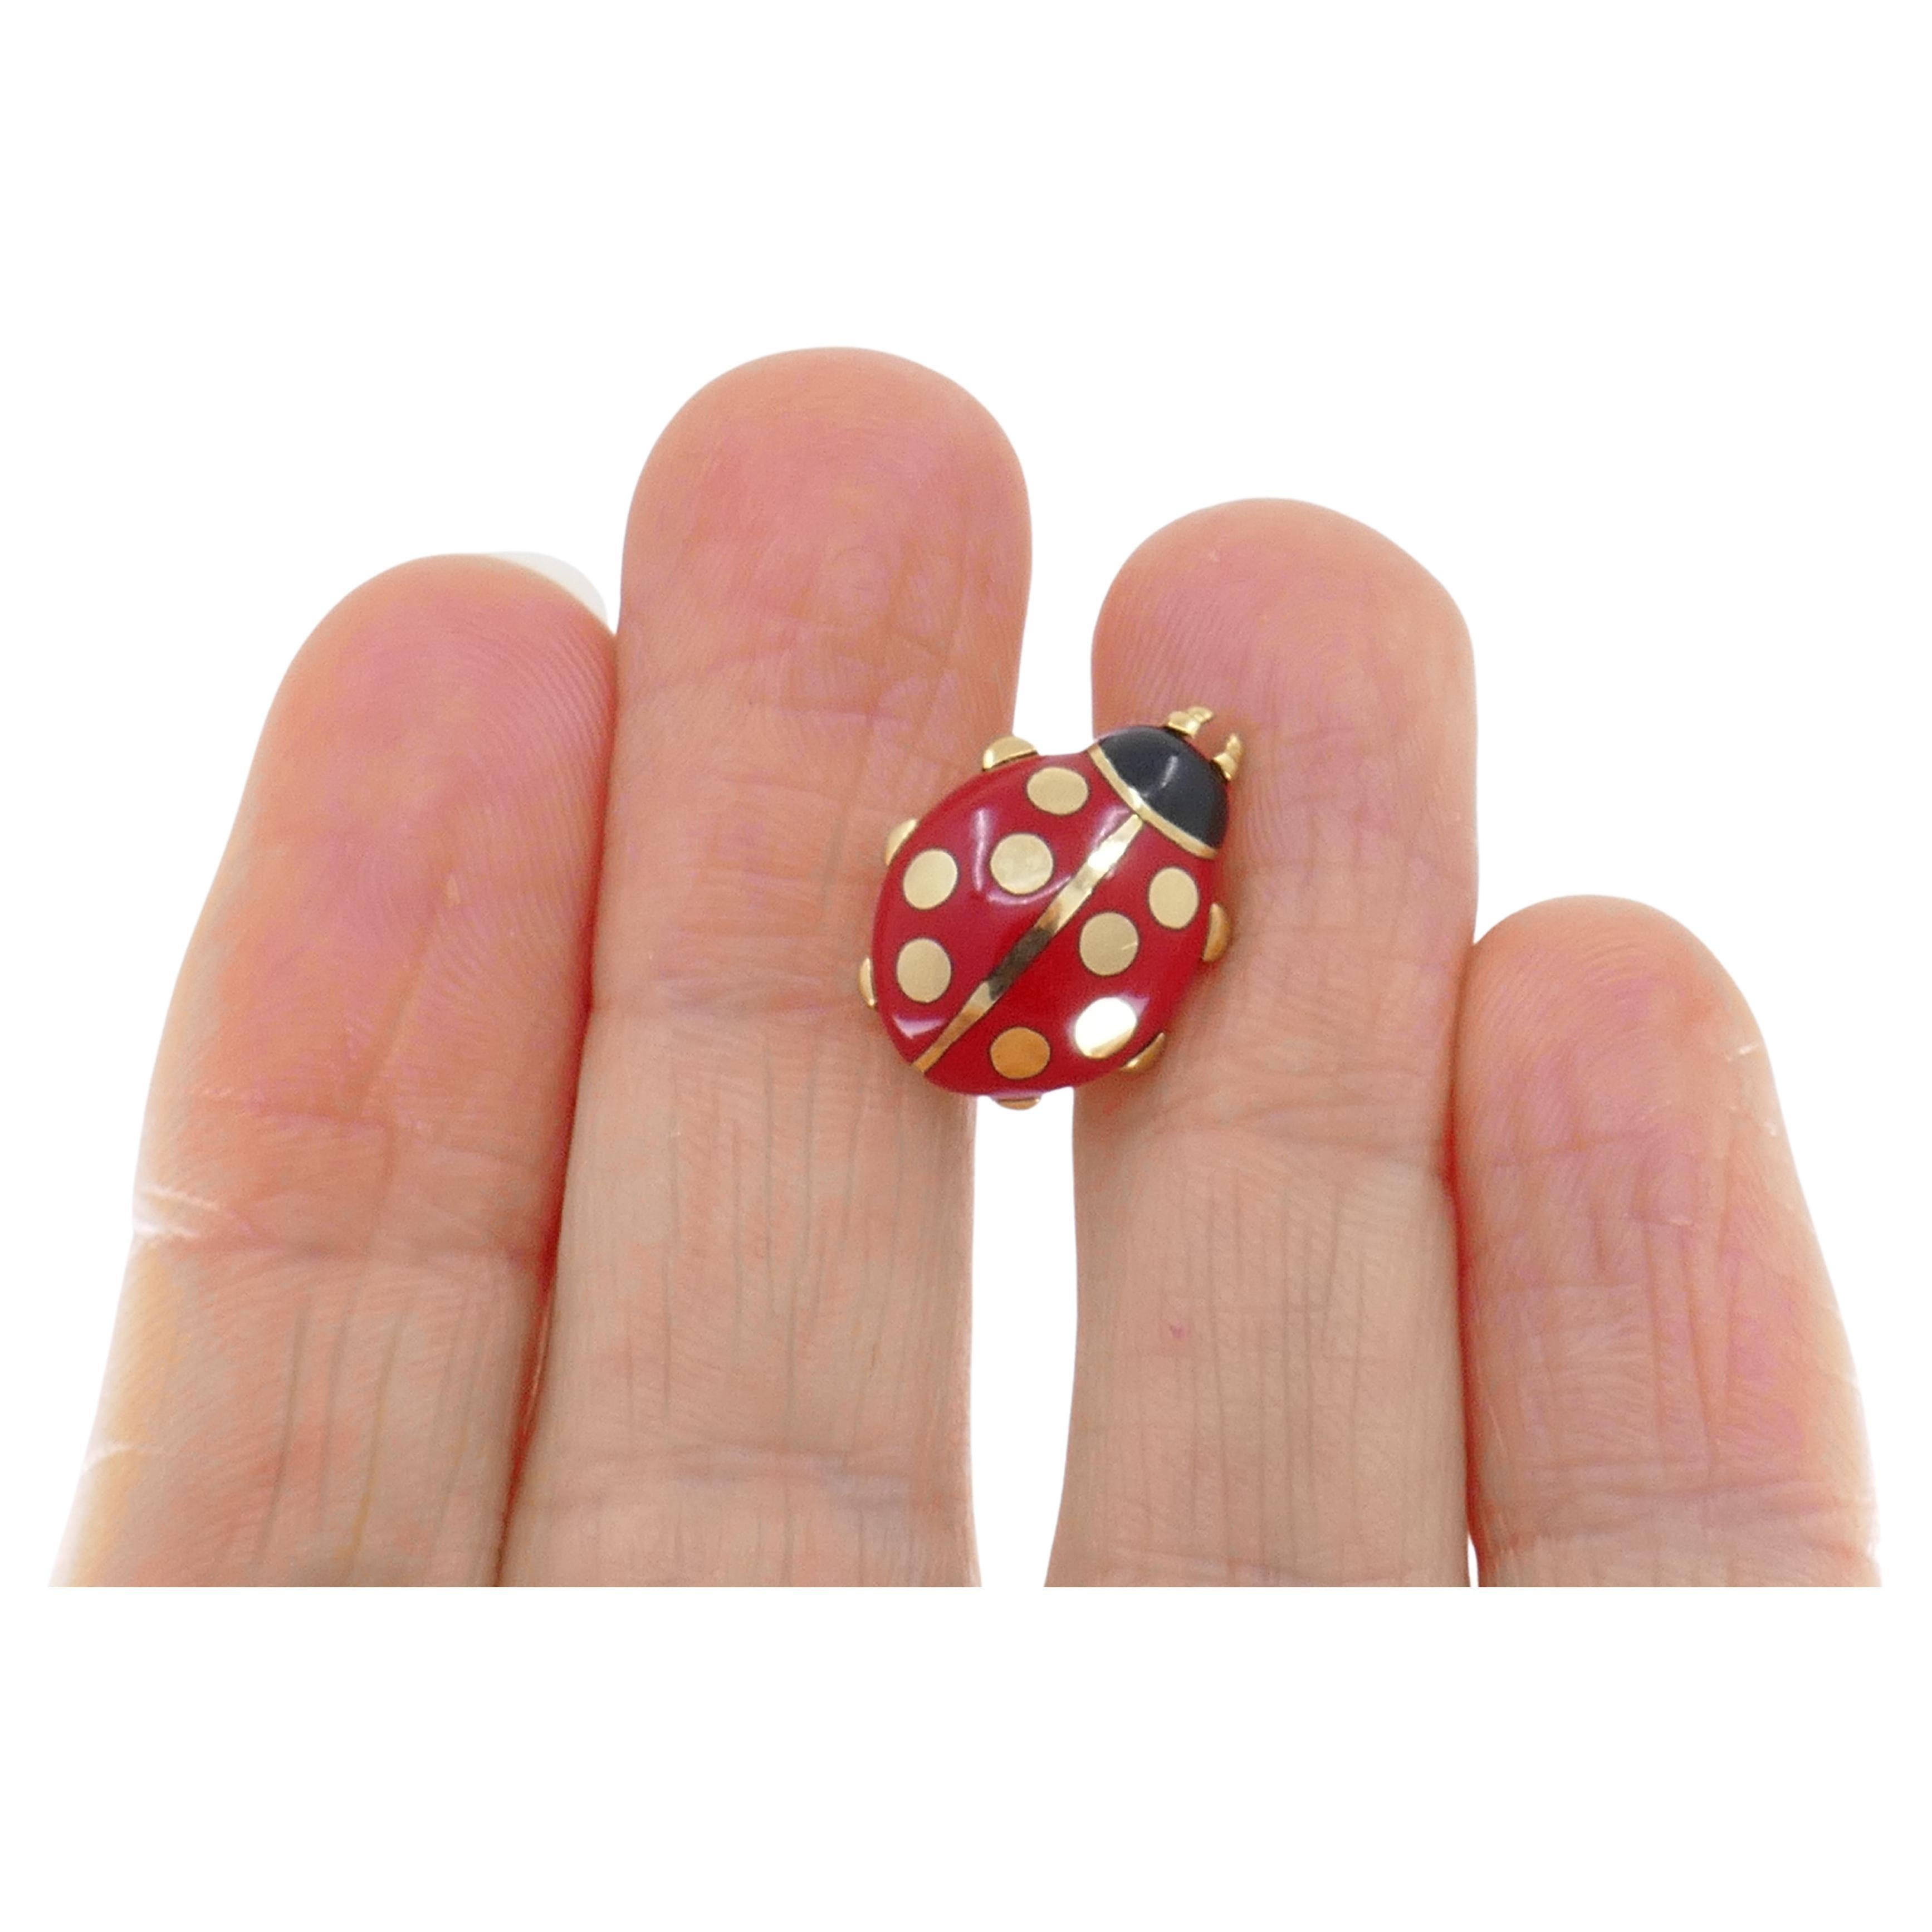 An adorable Cartier Ladybug pin, made of 18k gold and enamel.
This retro-looking piece came from the 1990s. Can be worn as a tie pin brooch.
In excellent condition, with intact enamel. Fully stamped with Cartier's marks, a serial number and a